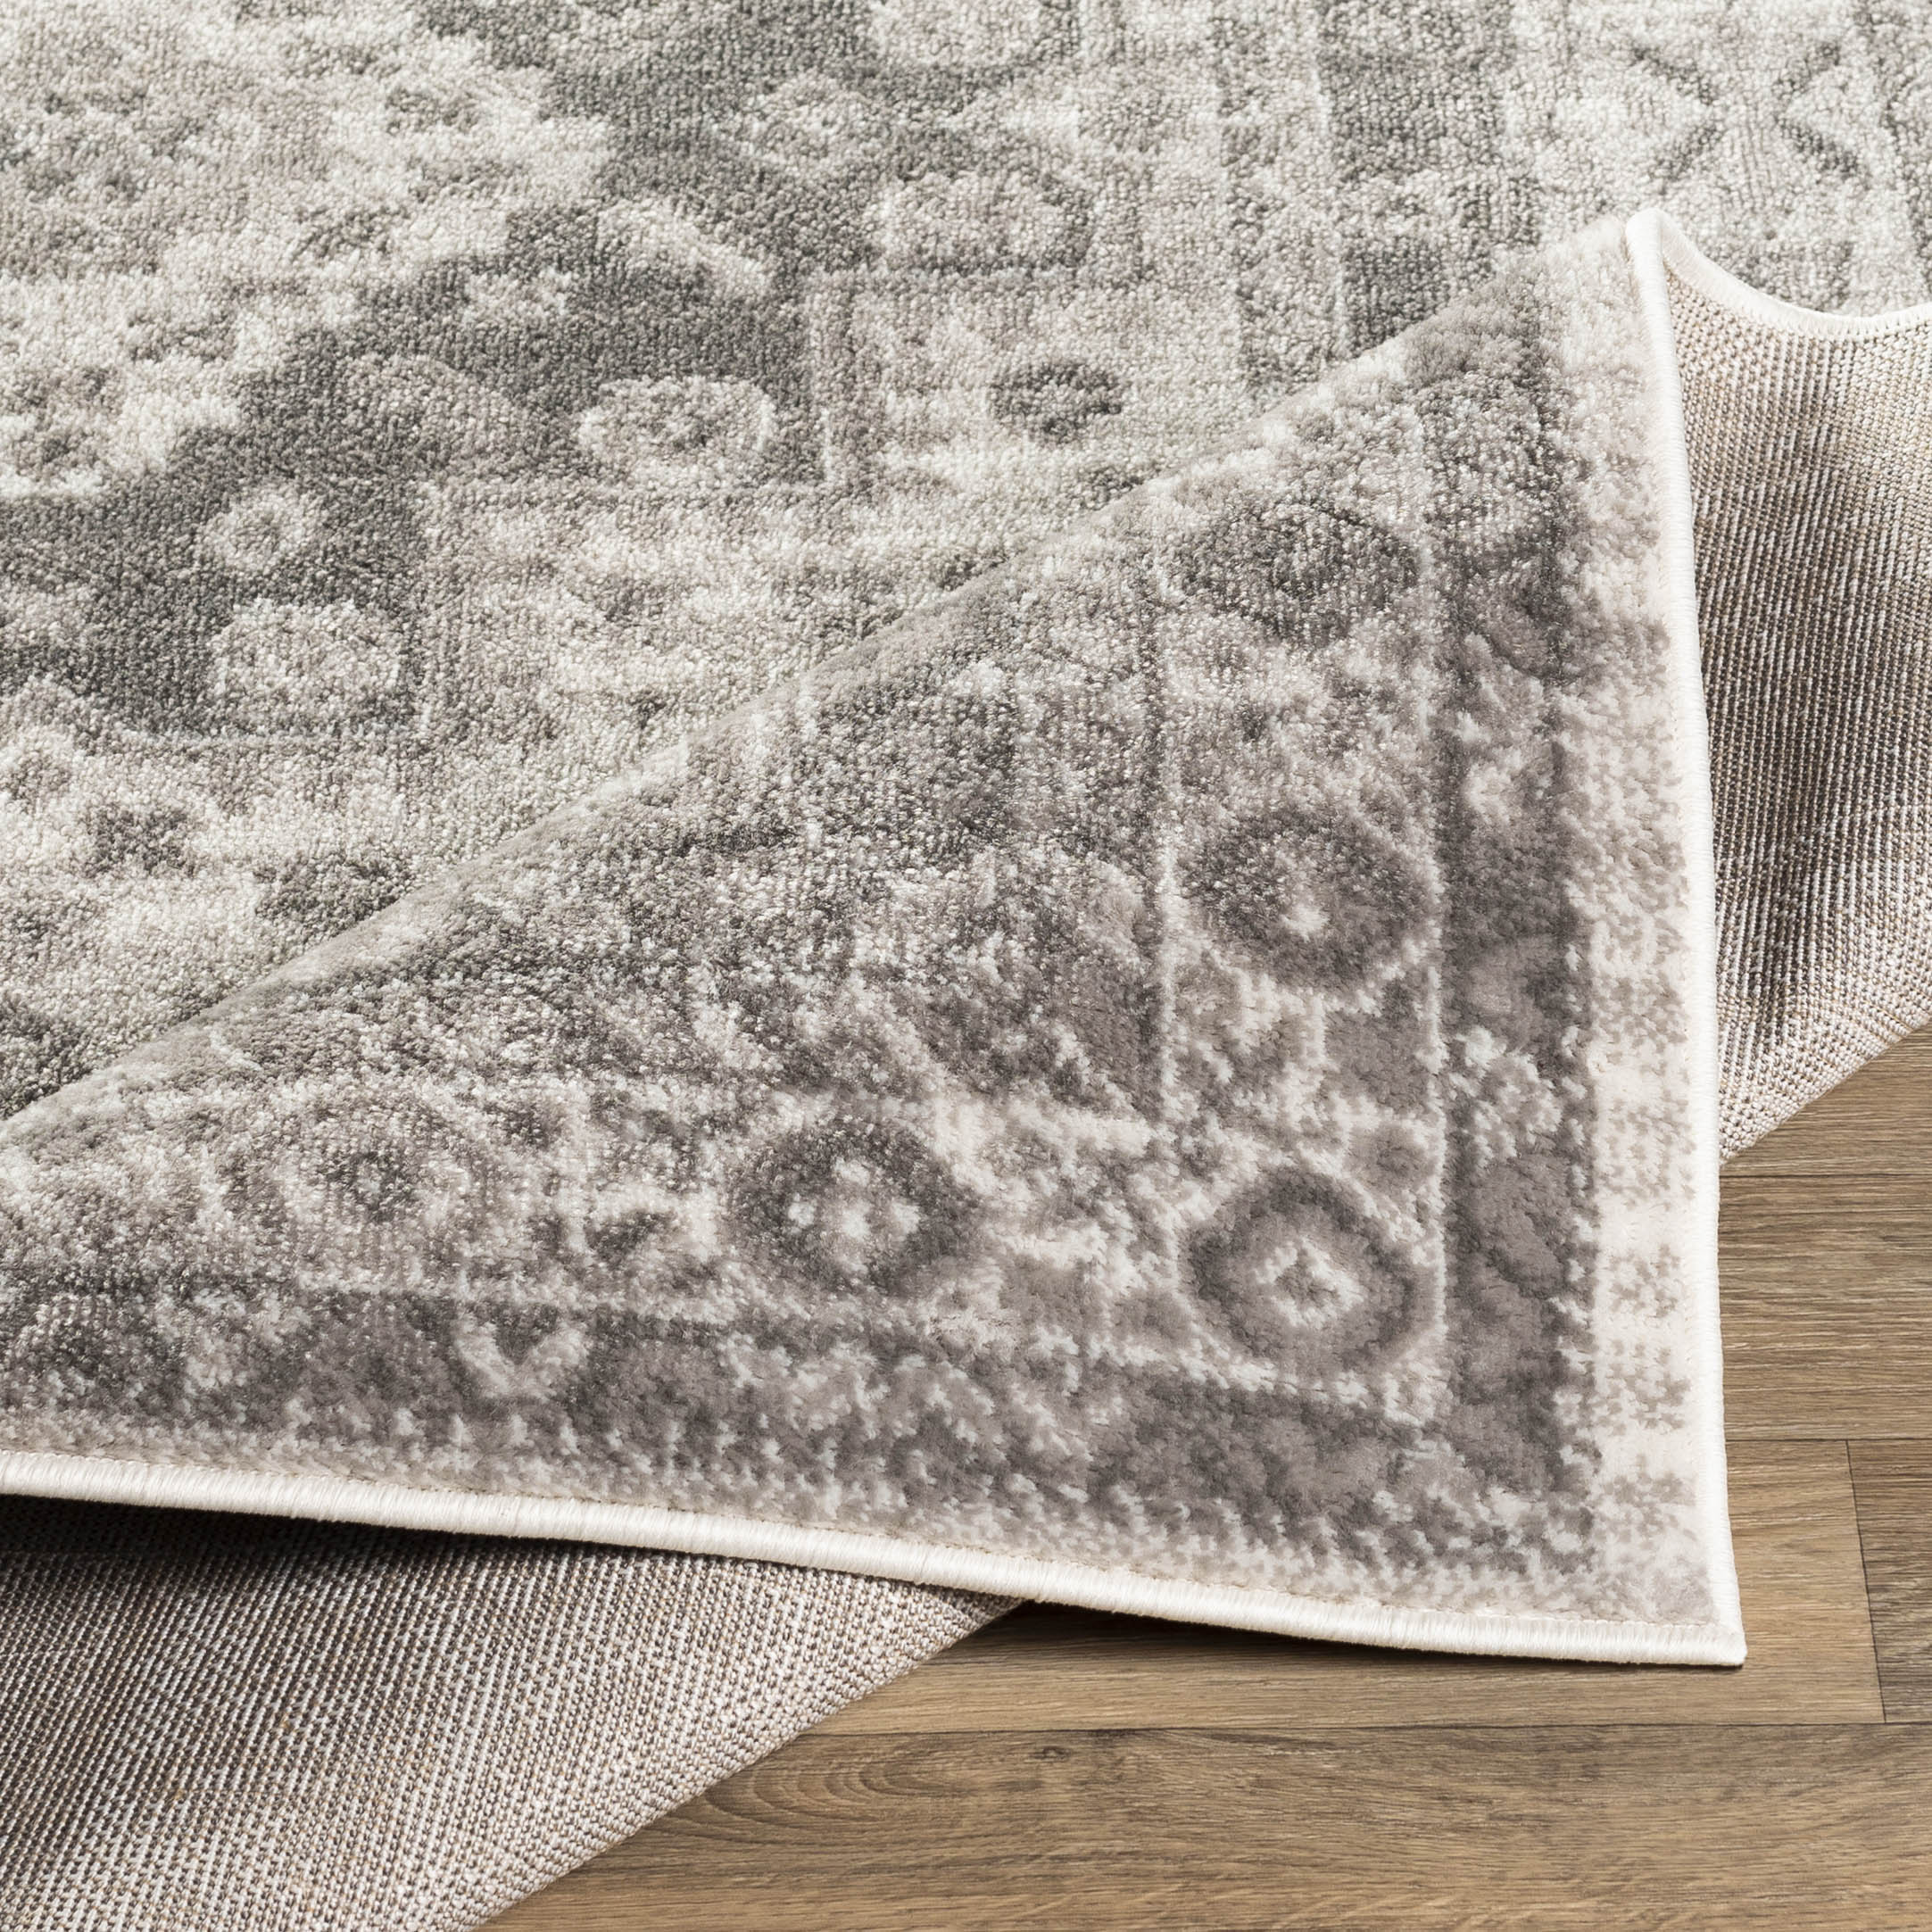 Dgarlac Transitional Area Rug